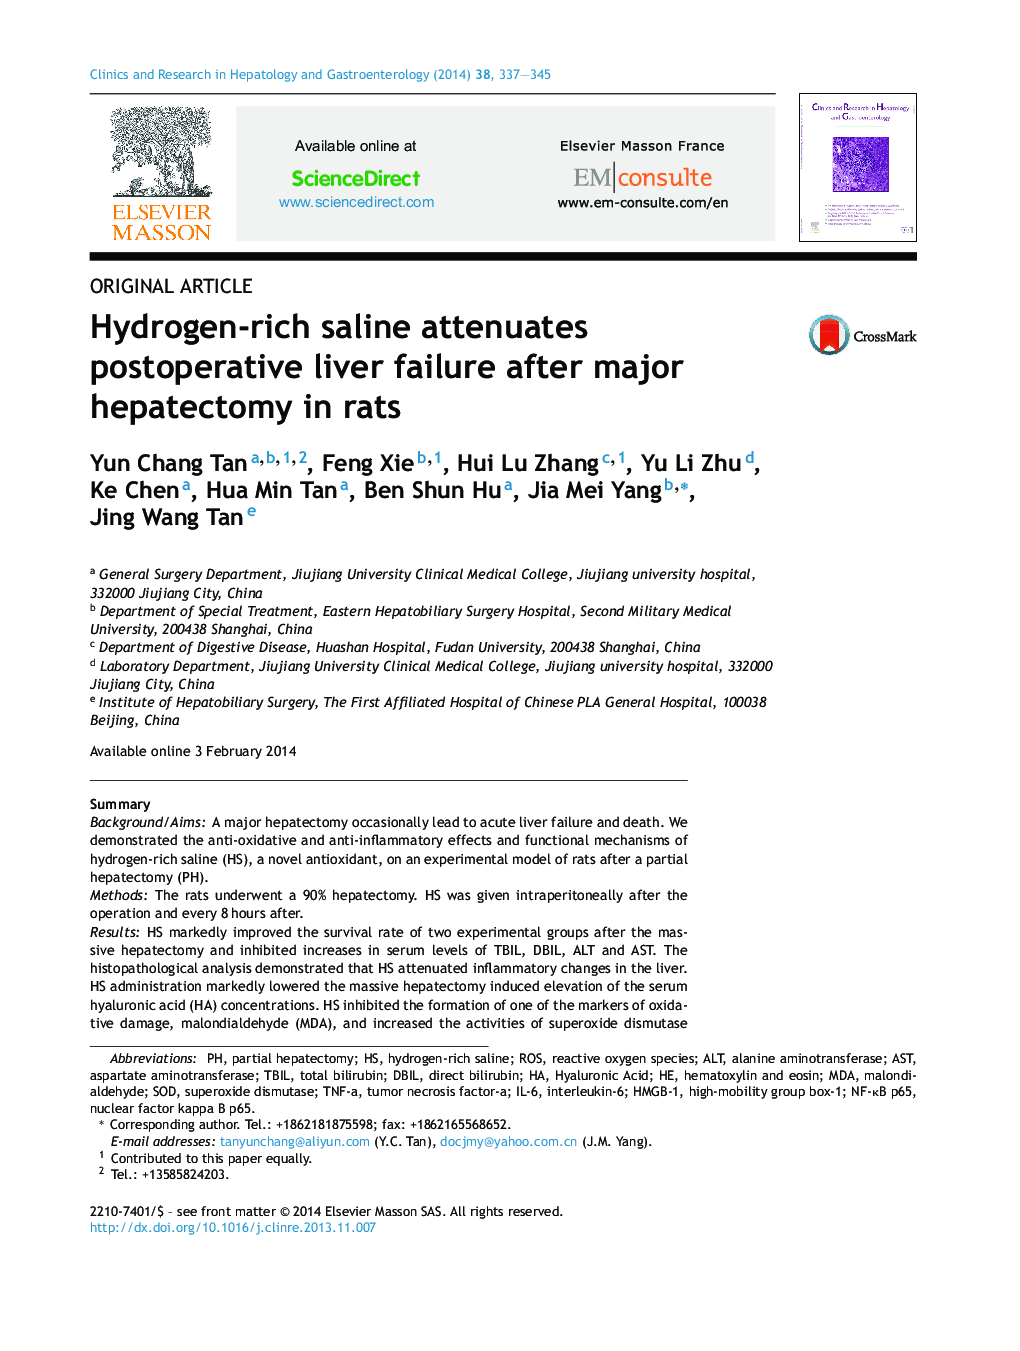 Hydrogen-rich saline attenuates postoperative liver failure after major hepatectomy in rats